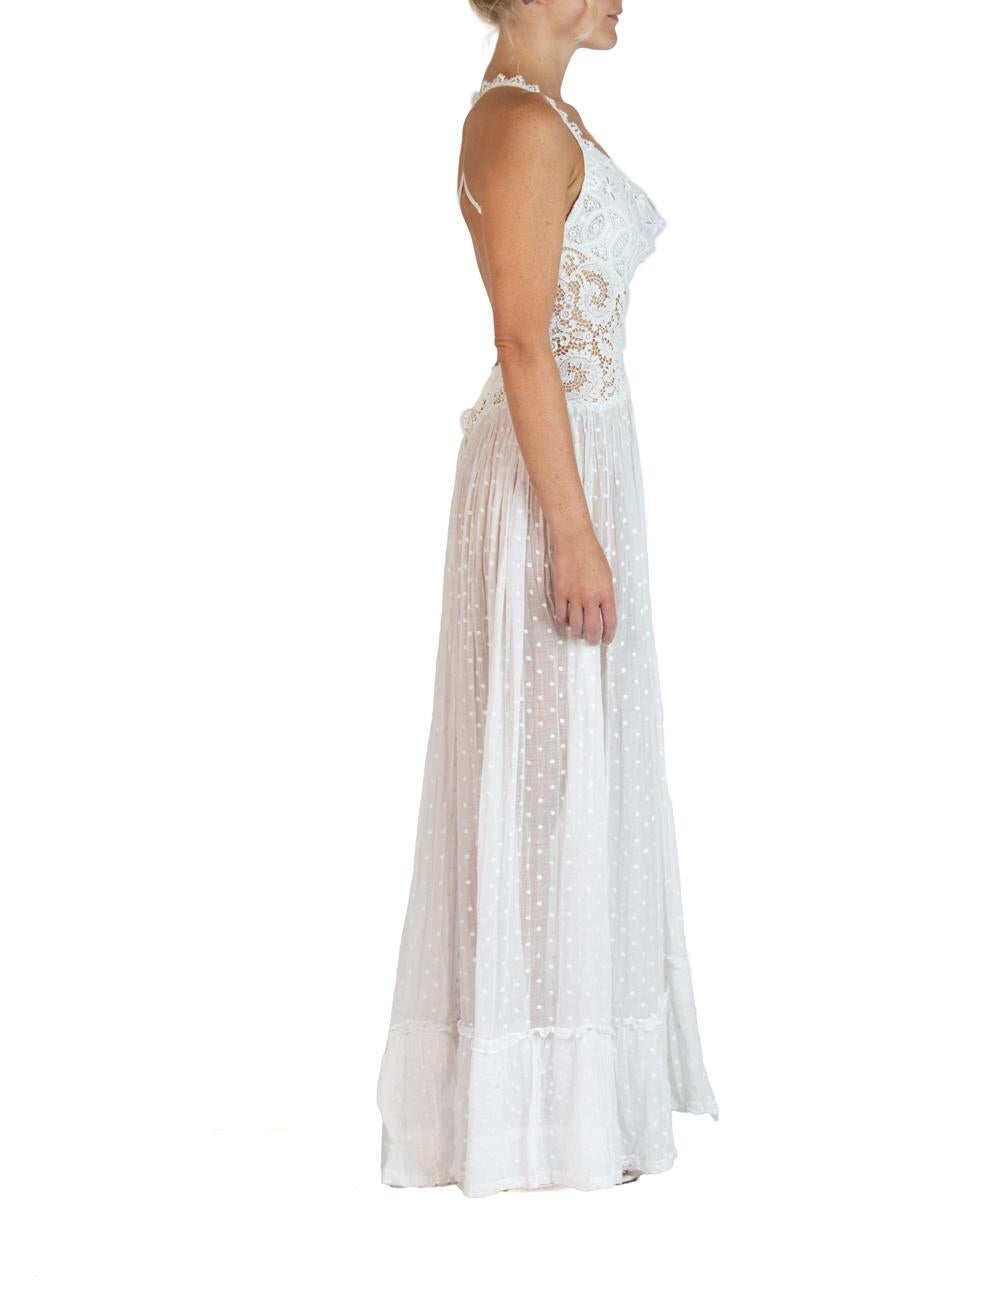 Women's MORPHEW ATELIER White Organic Cotton With Victorian Lace & Dotted Voile Gown For Sale